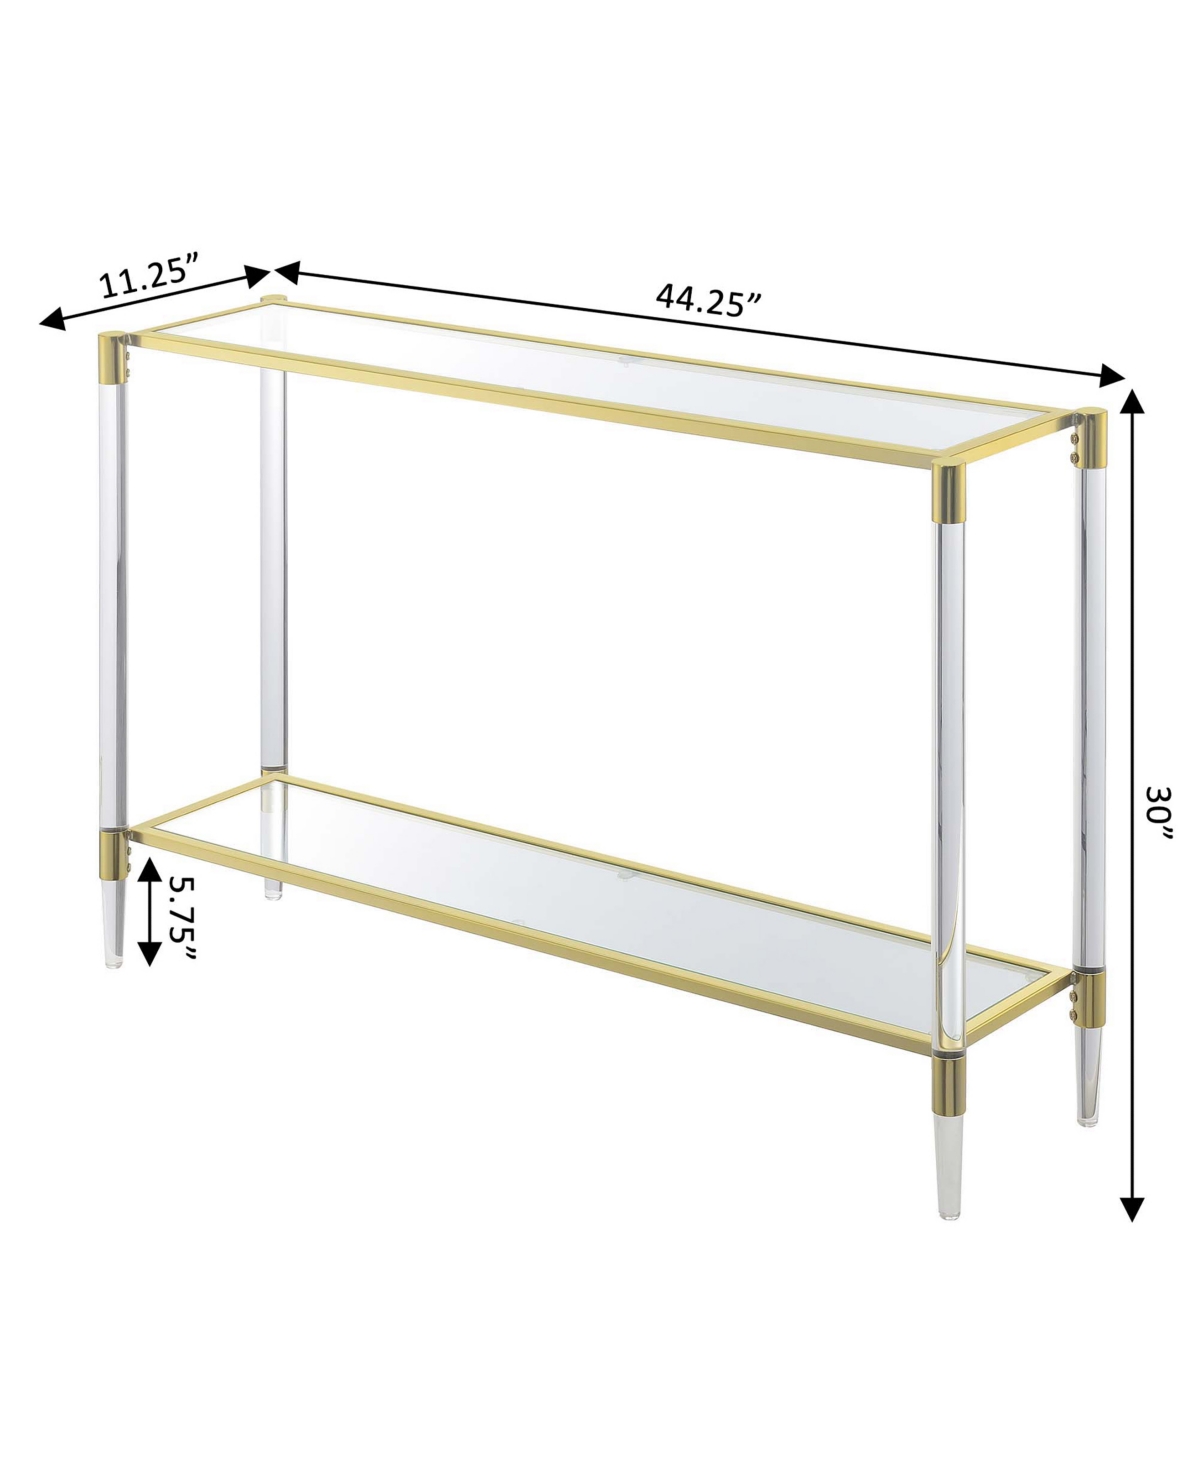 Shop Convenience Concepts 44.25" Glass Royal Crest 2 Tier Acrylic Console Table In Gold,glass